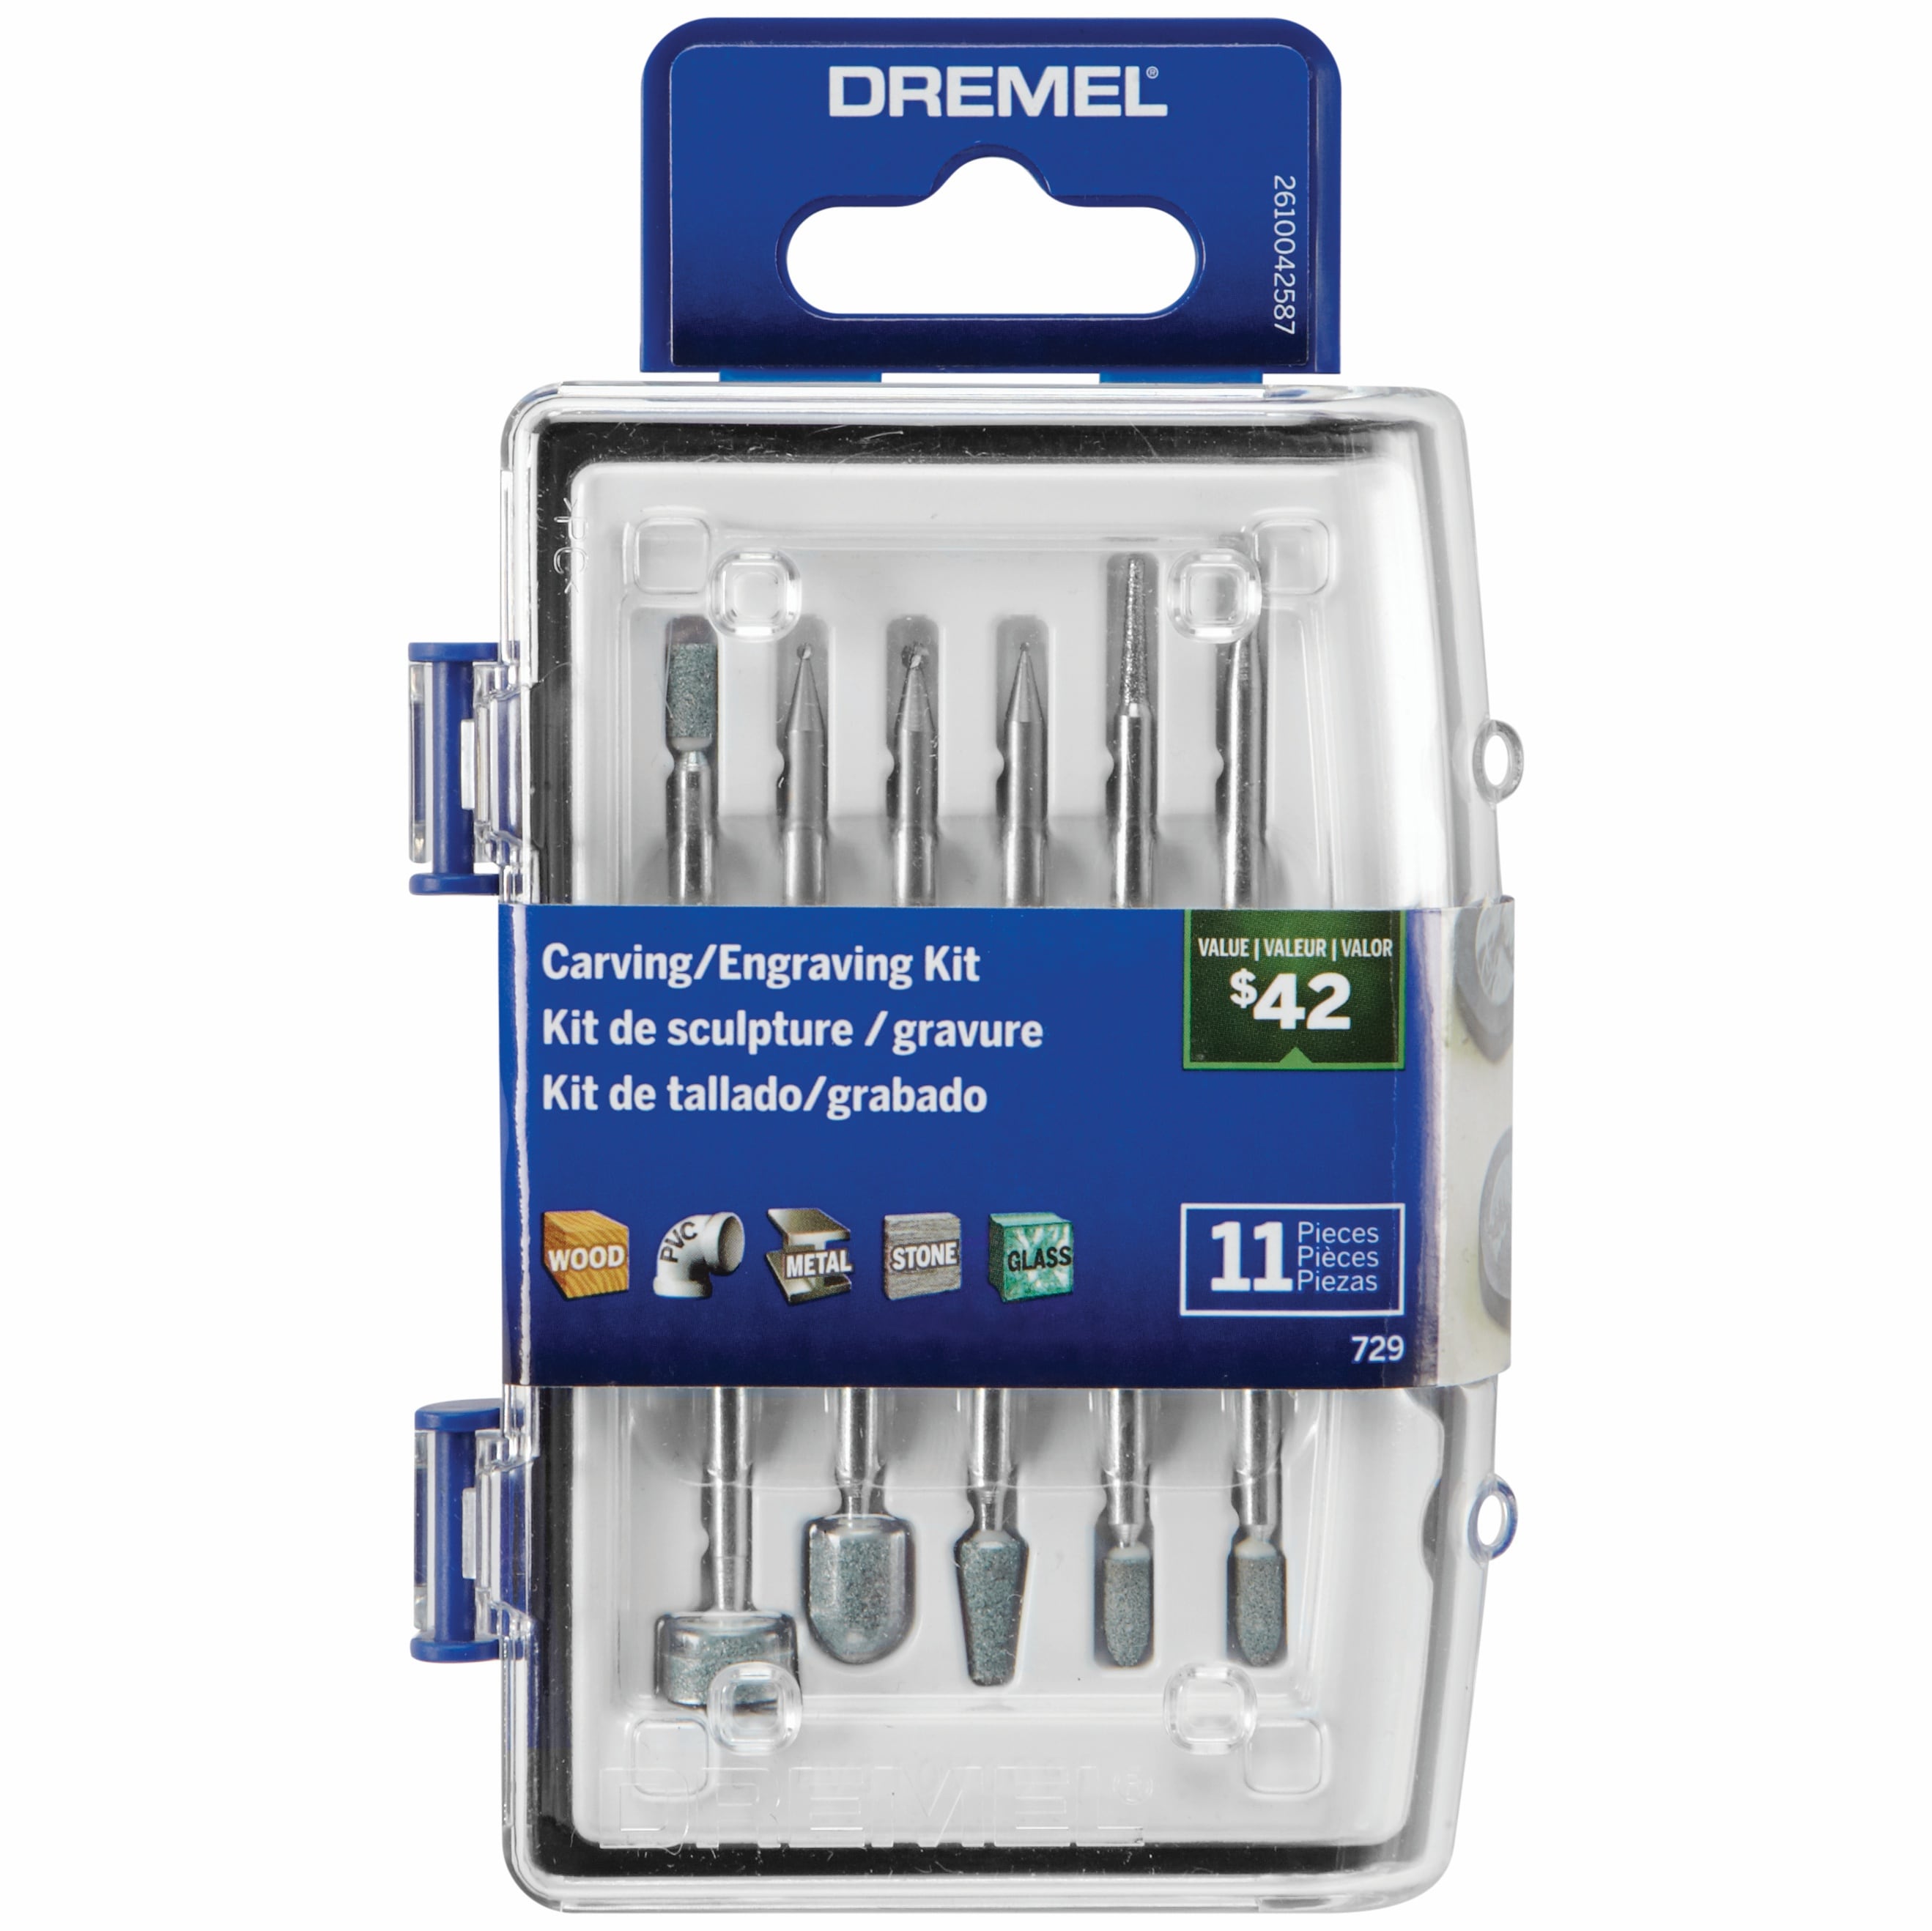 Make Sure You Have the Best Dremel Wood Carving Bits for Woodworking